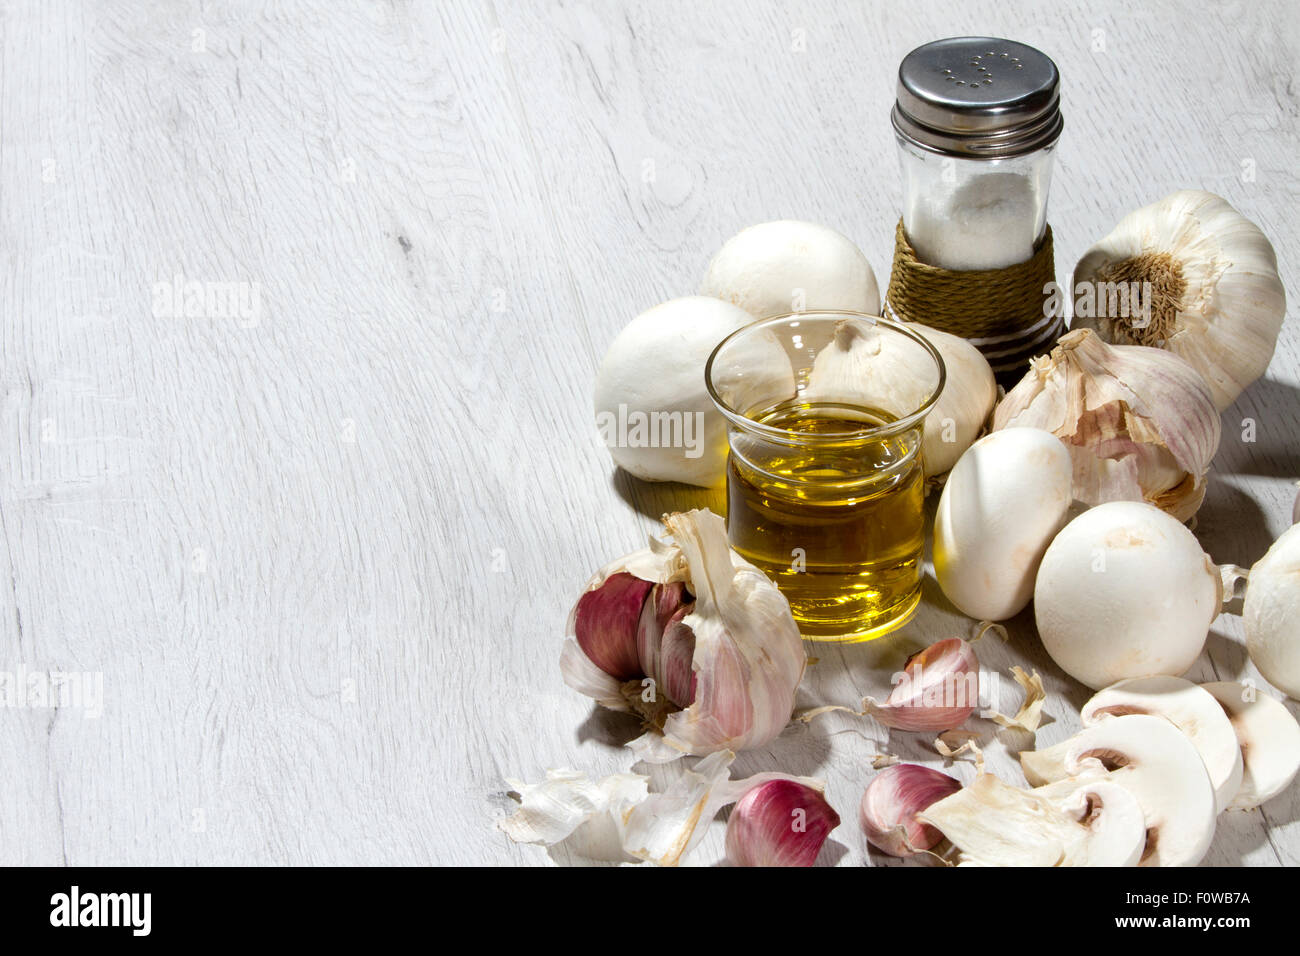 Garlic mushrooms ingredients for recipe with a free space at the left for writting Stock Photo